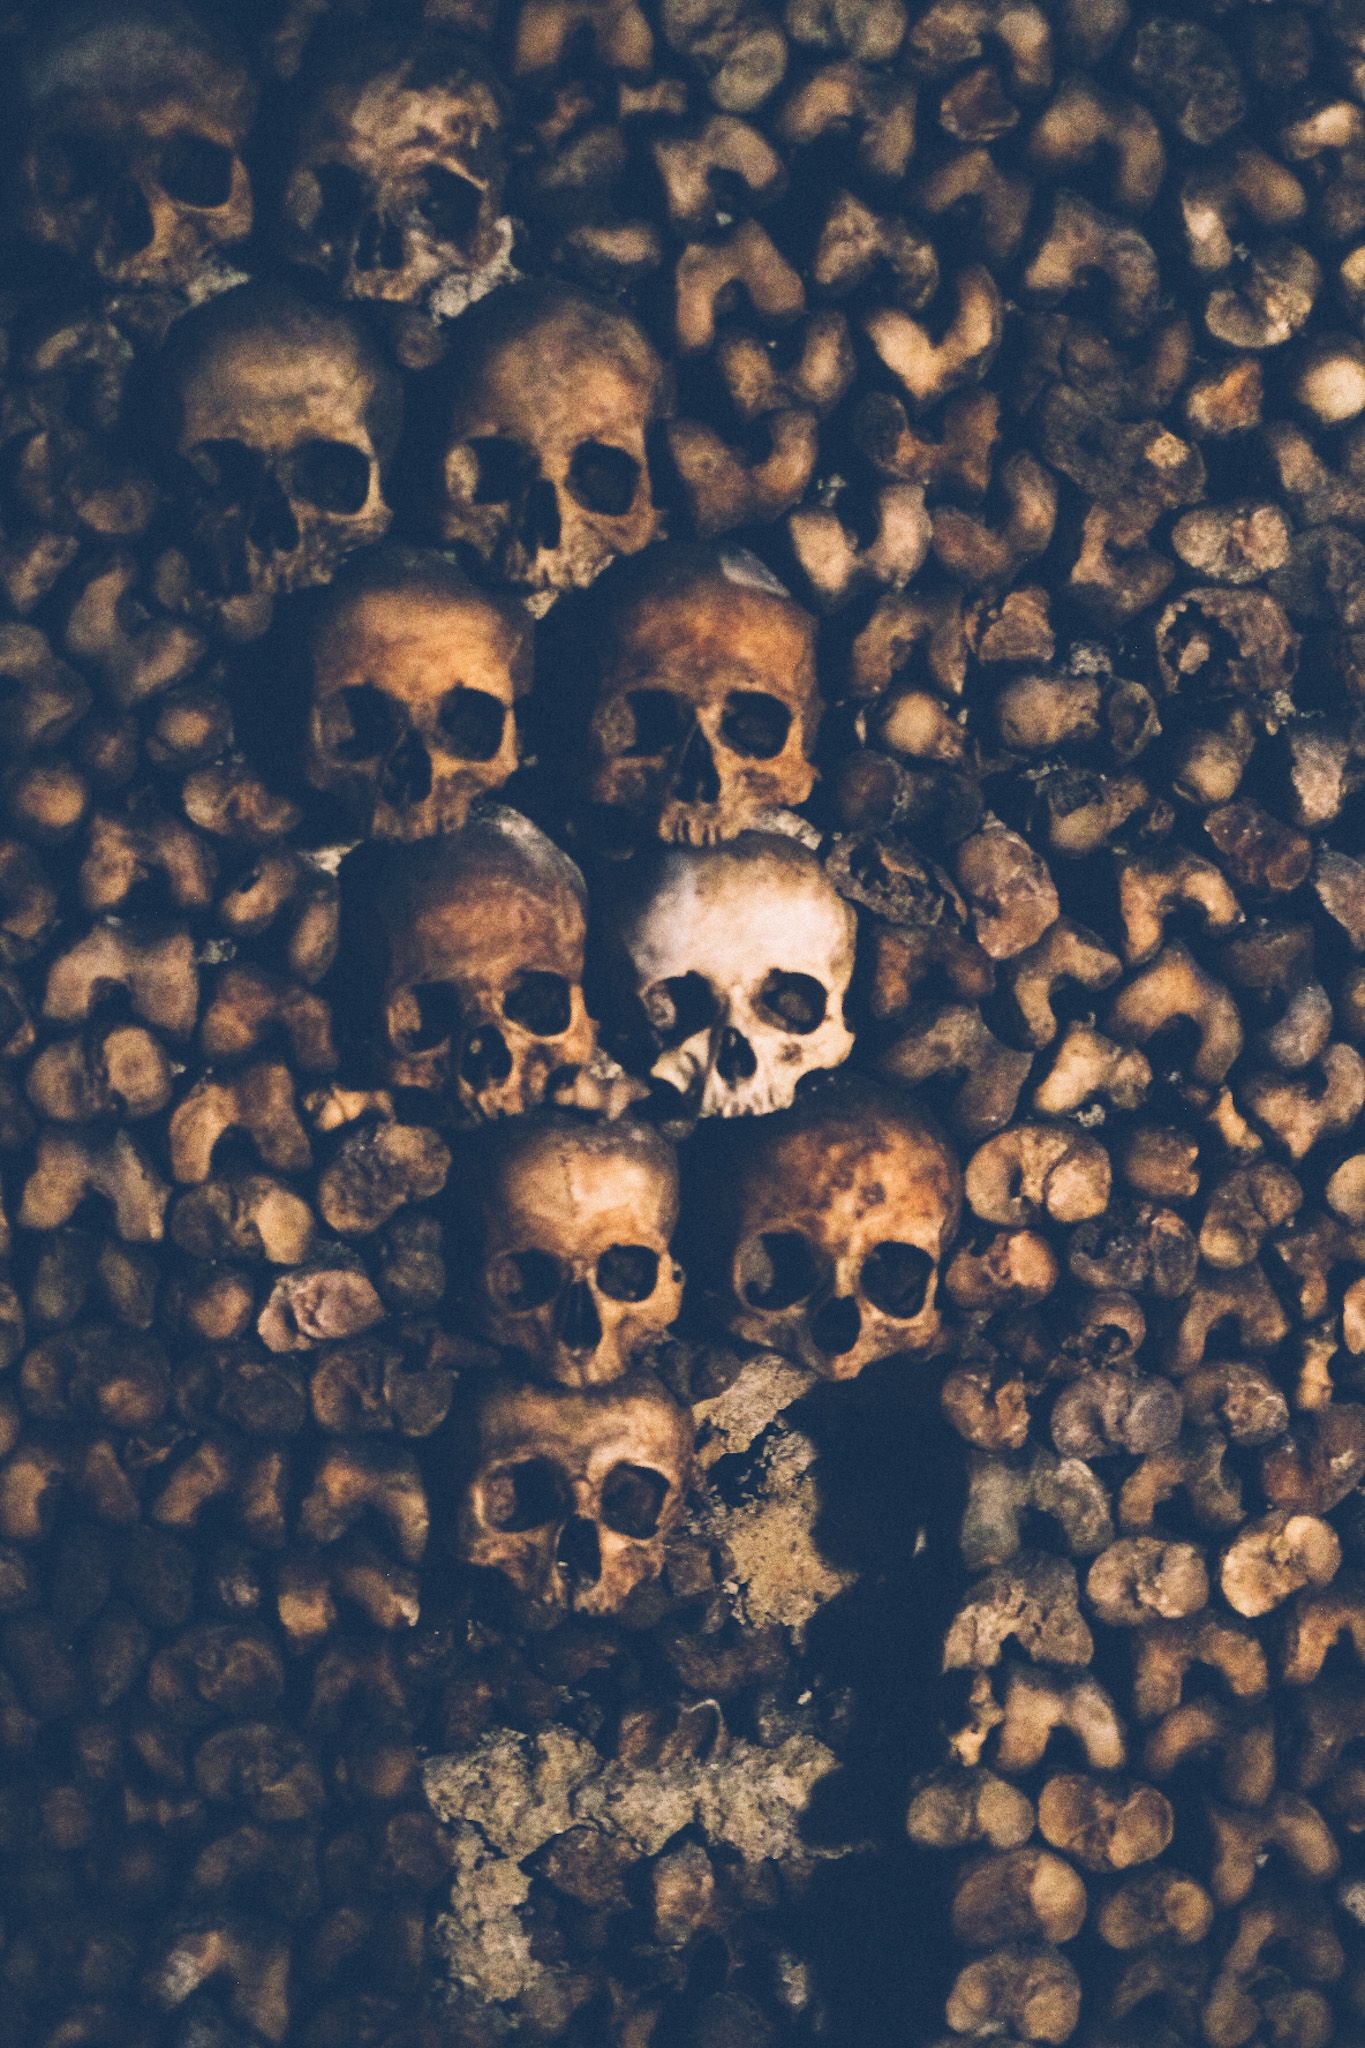 A stack of skulls form a diagonal pattern amidst other bones in the Paris catacombs.